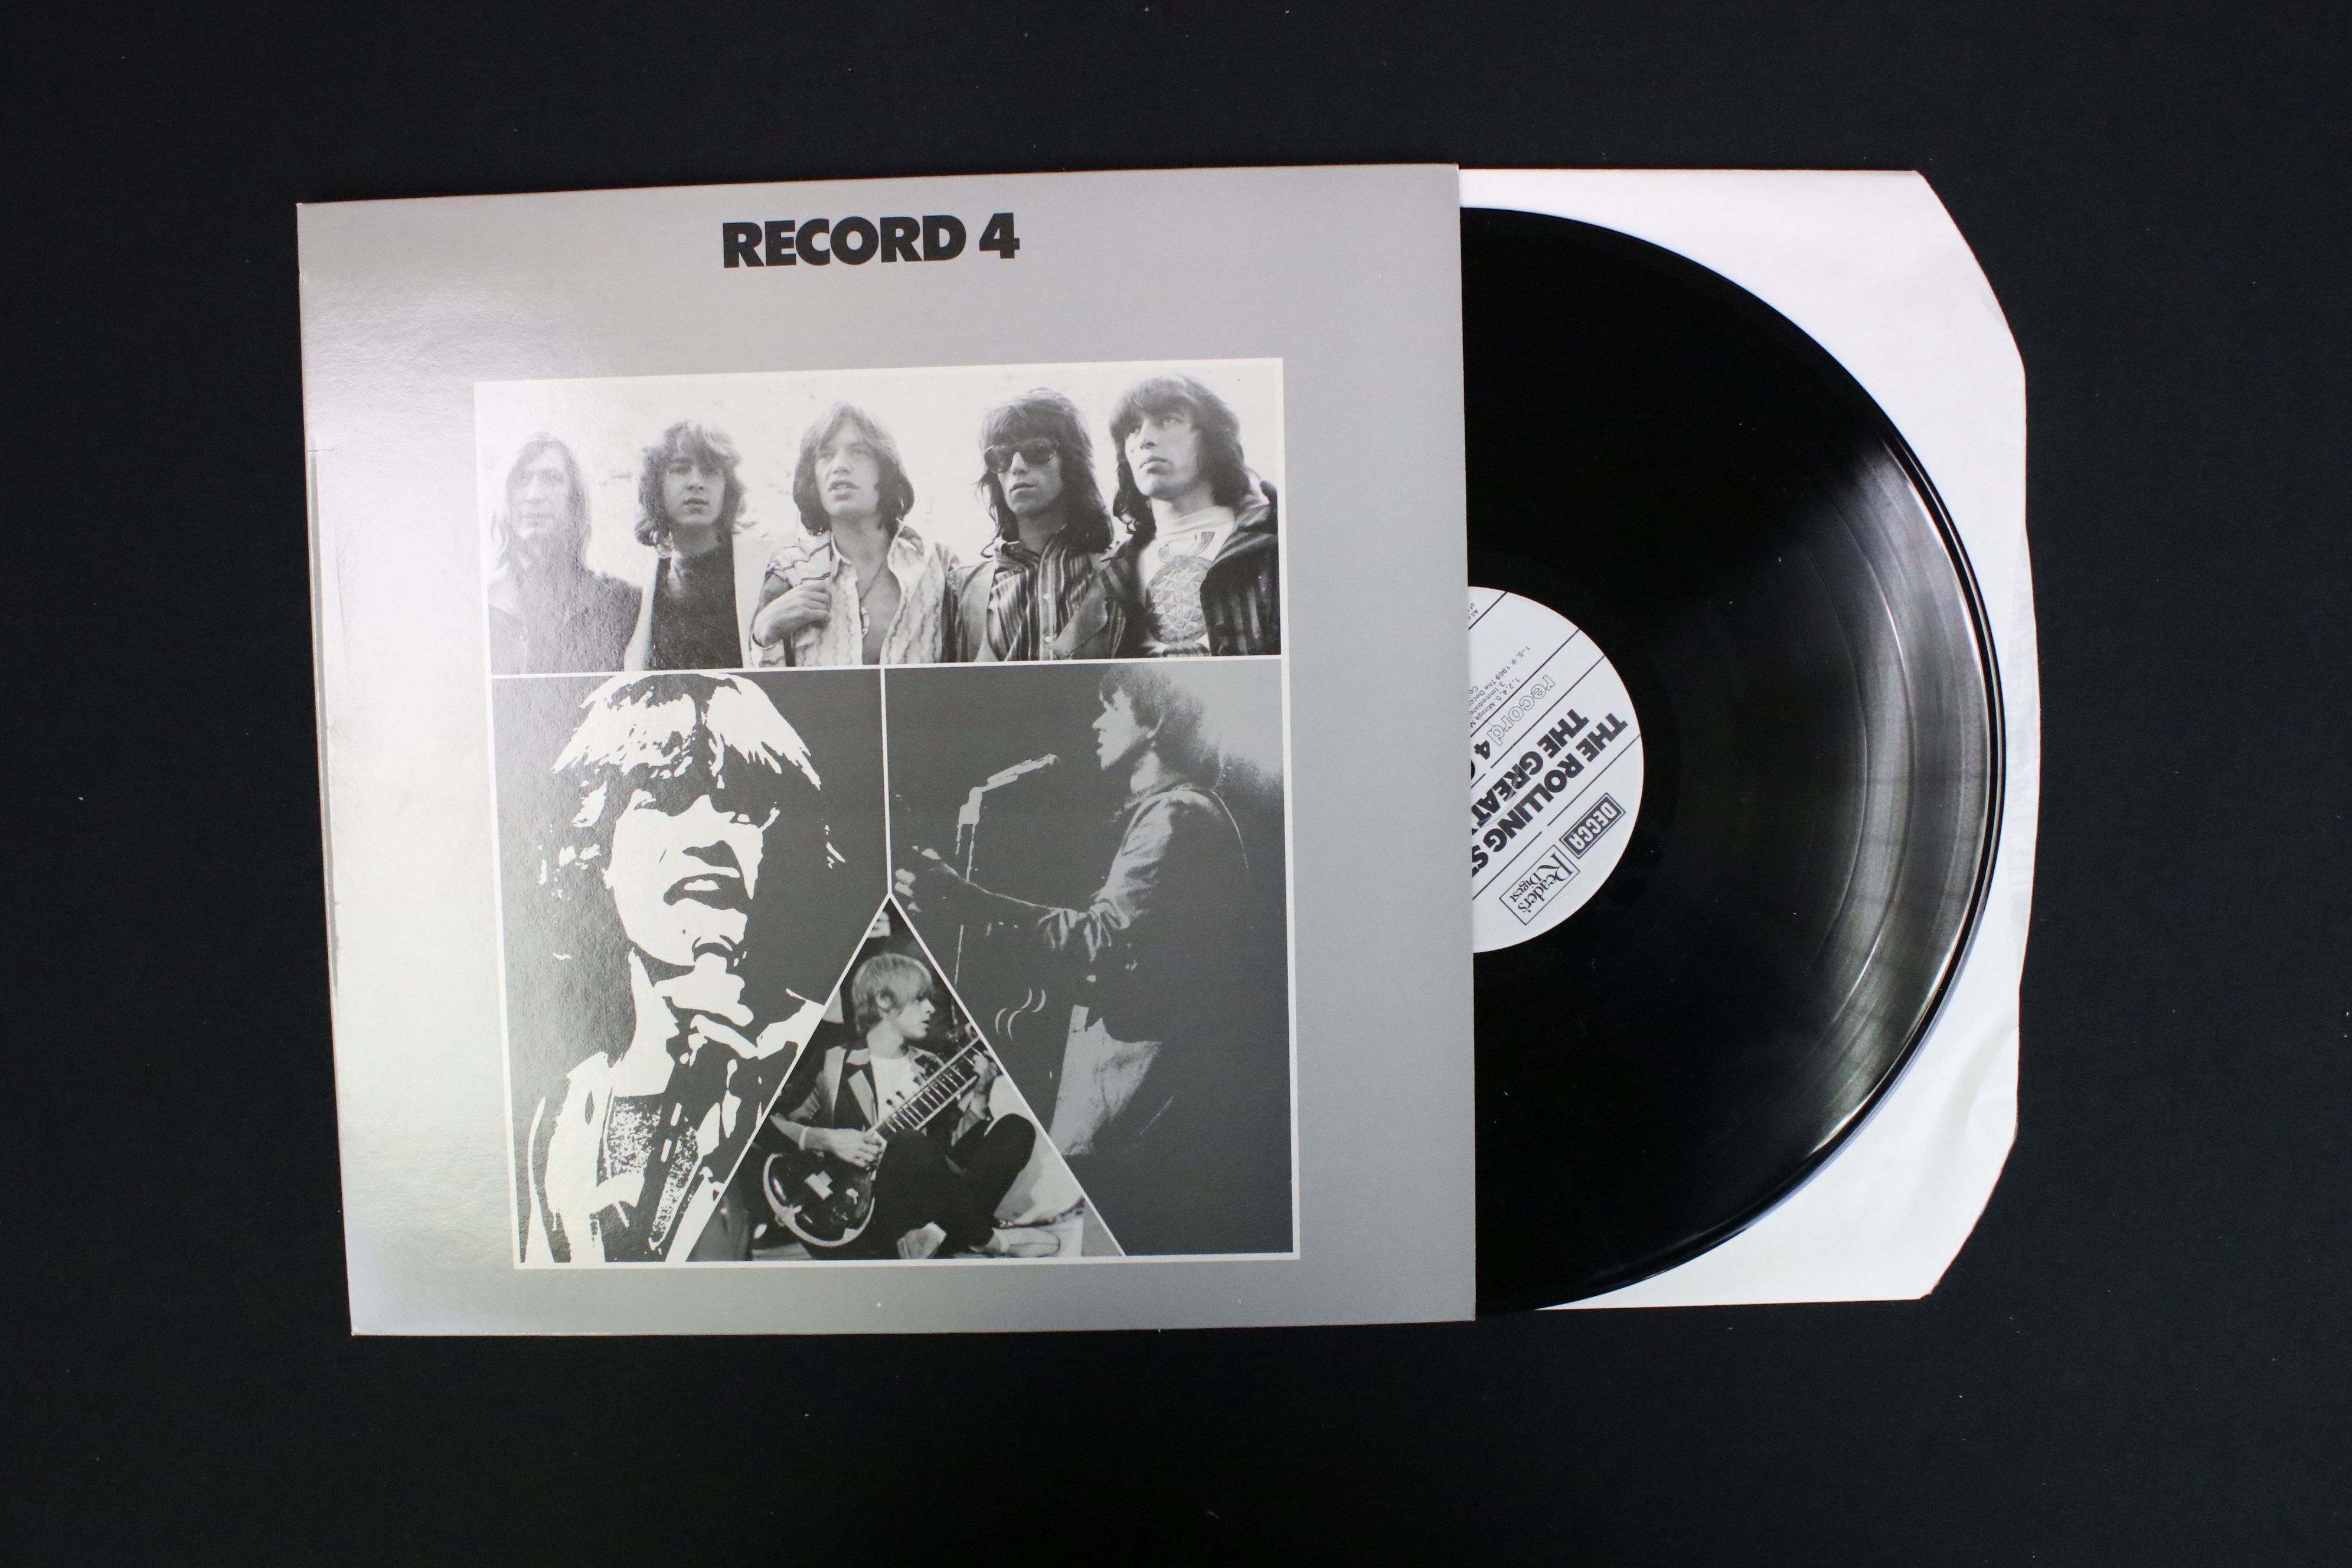 Vinyl - The Rolling Stones The Great Years Box Set on Readers Digest / Decca 4 LP Box Set, box, - Image 8 of 11